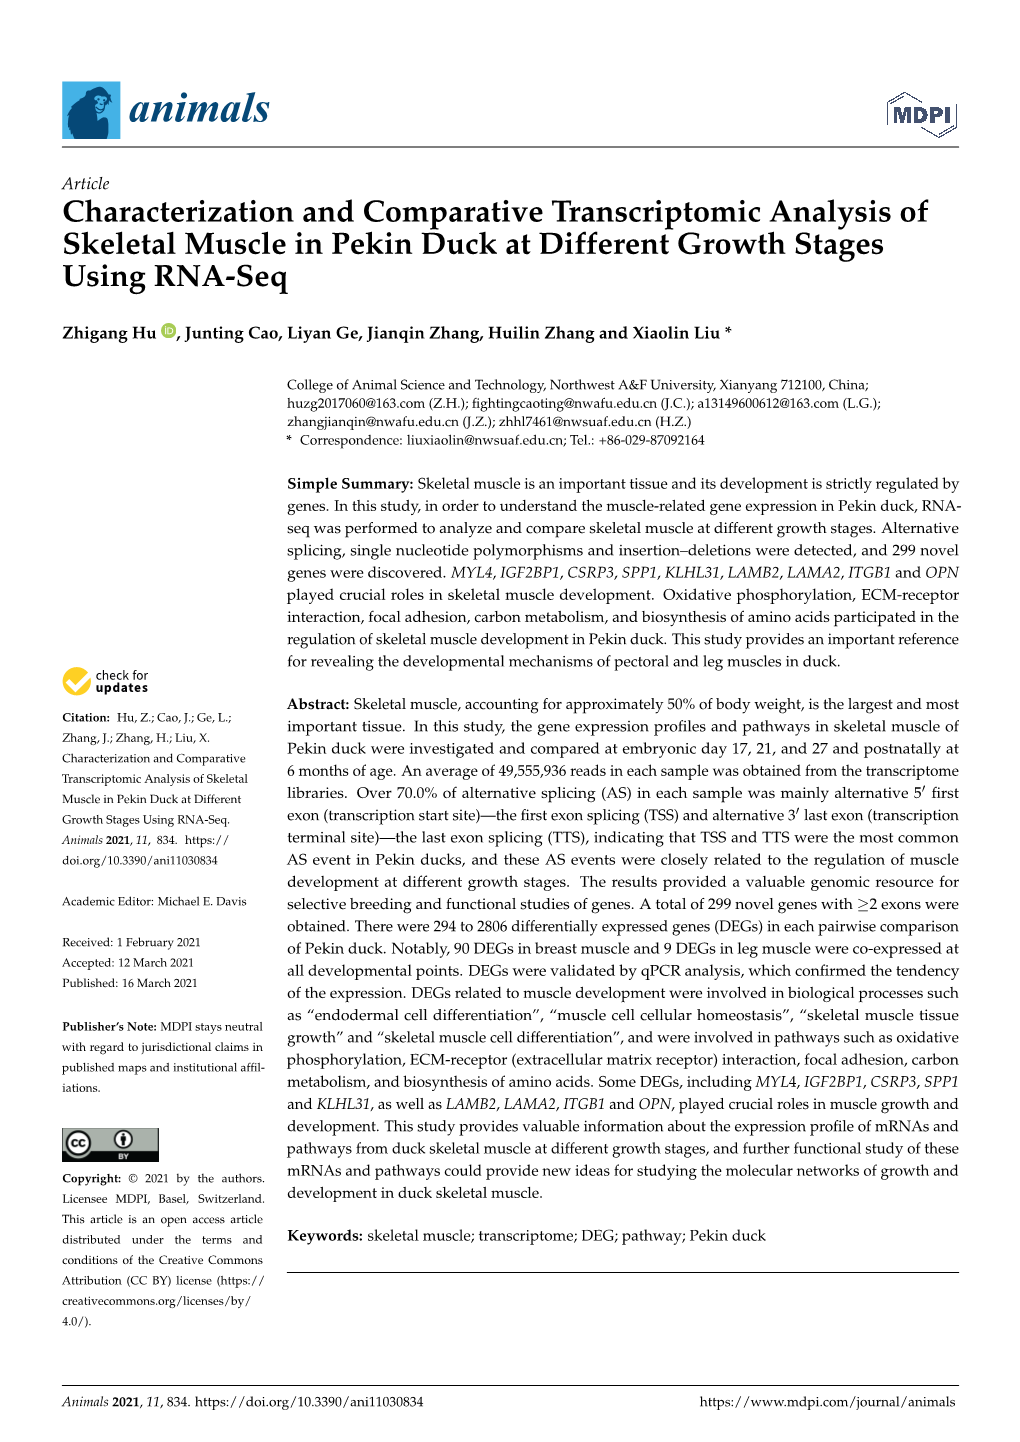 Characterization and Comparative Transcriptomic Analysis of Skeletal Muscle in Pekin Duck at Different Growth Stages Using RNA-Seq